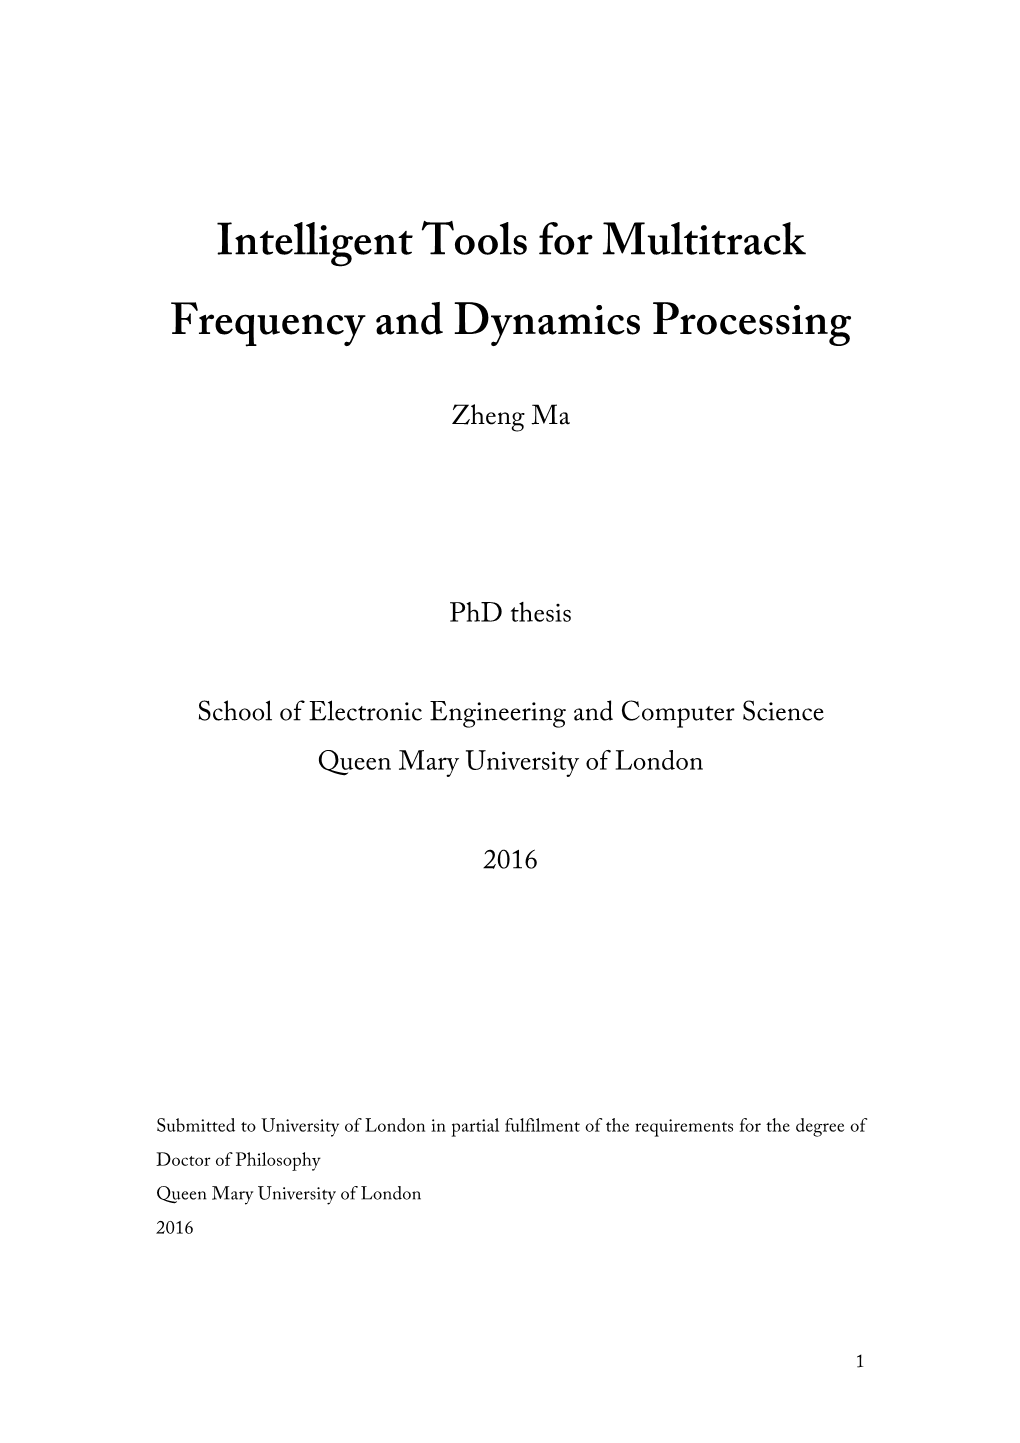 Intelligent Tools for Multitrack Frequency and Dynamics Processing